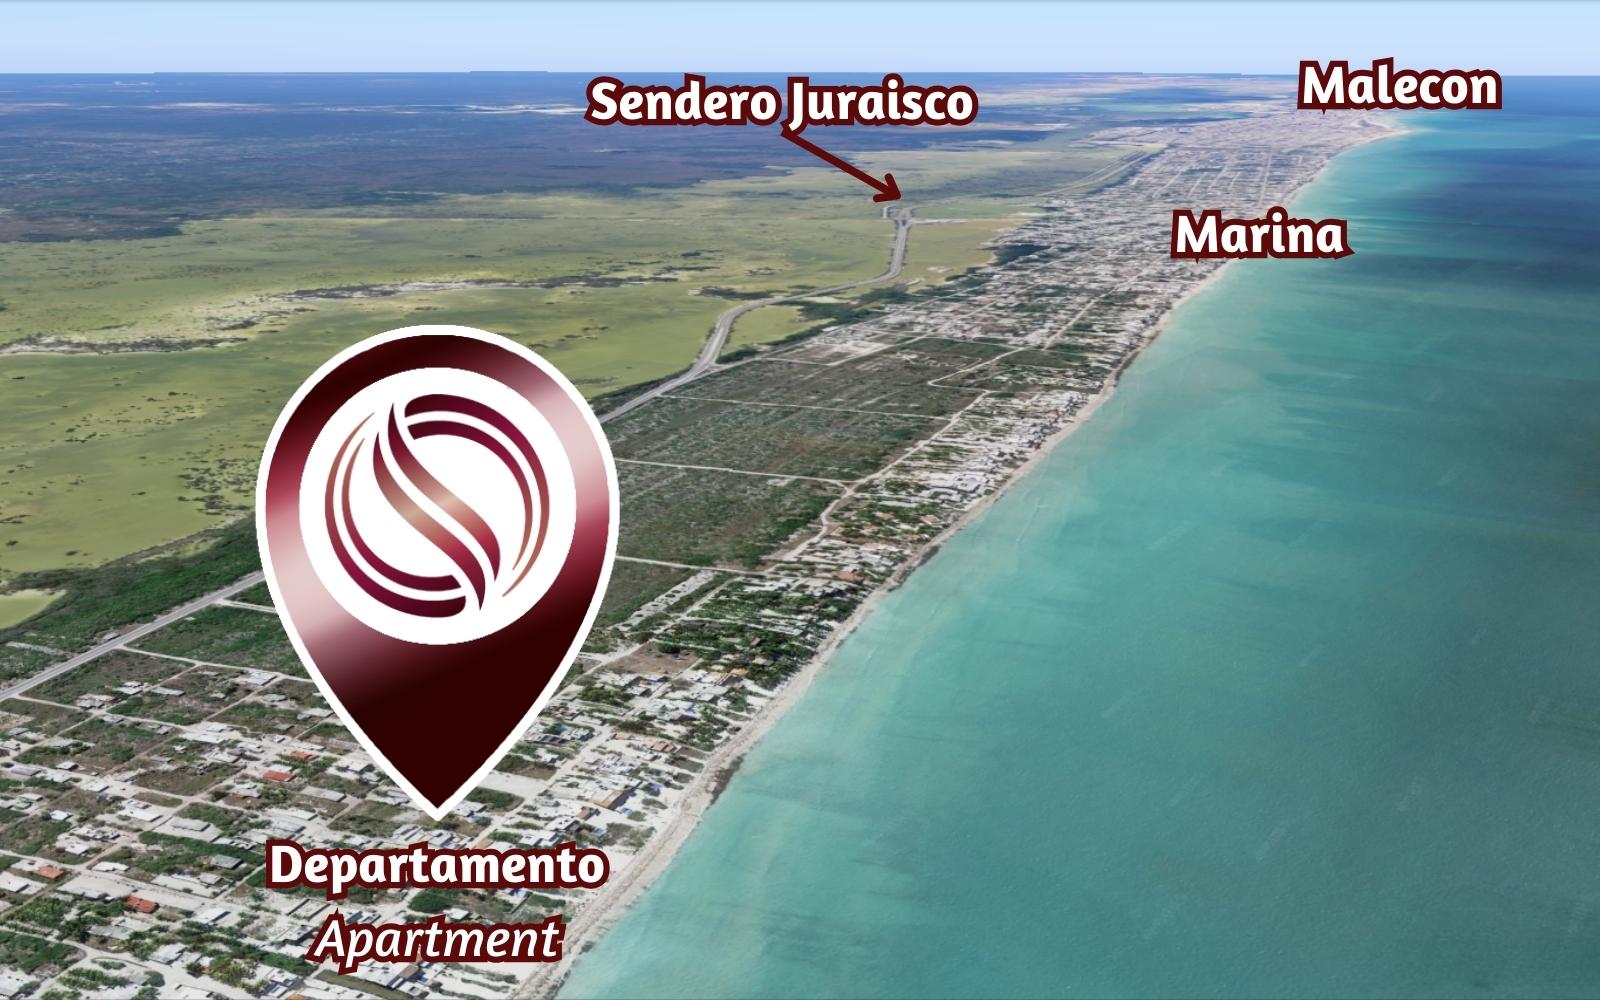 Condominium with access to the beach and beach club, green areas and amenities, pre-construction for sale Chicxulub Yucatan